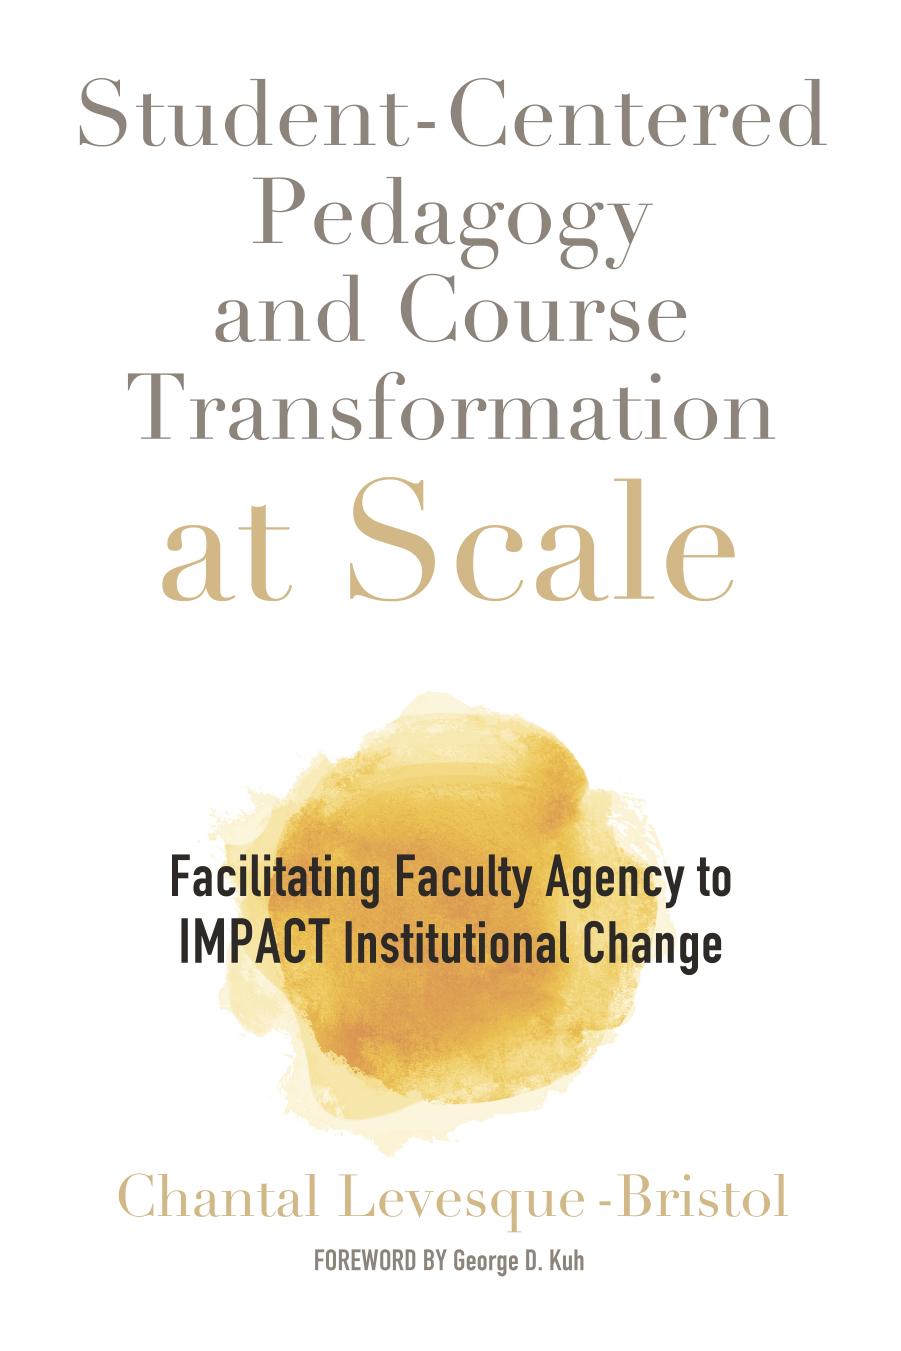 Student-Centered Pedagogy and Course Transformation at Scale: Facilitating Faculty Agency to IMPACT Institutional Change by Chantal Levesque-Bristol